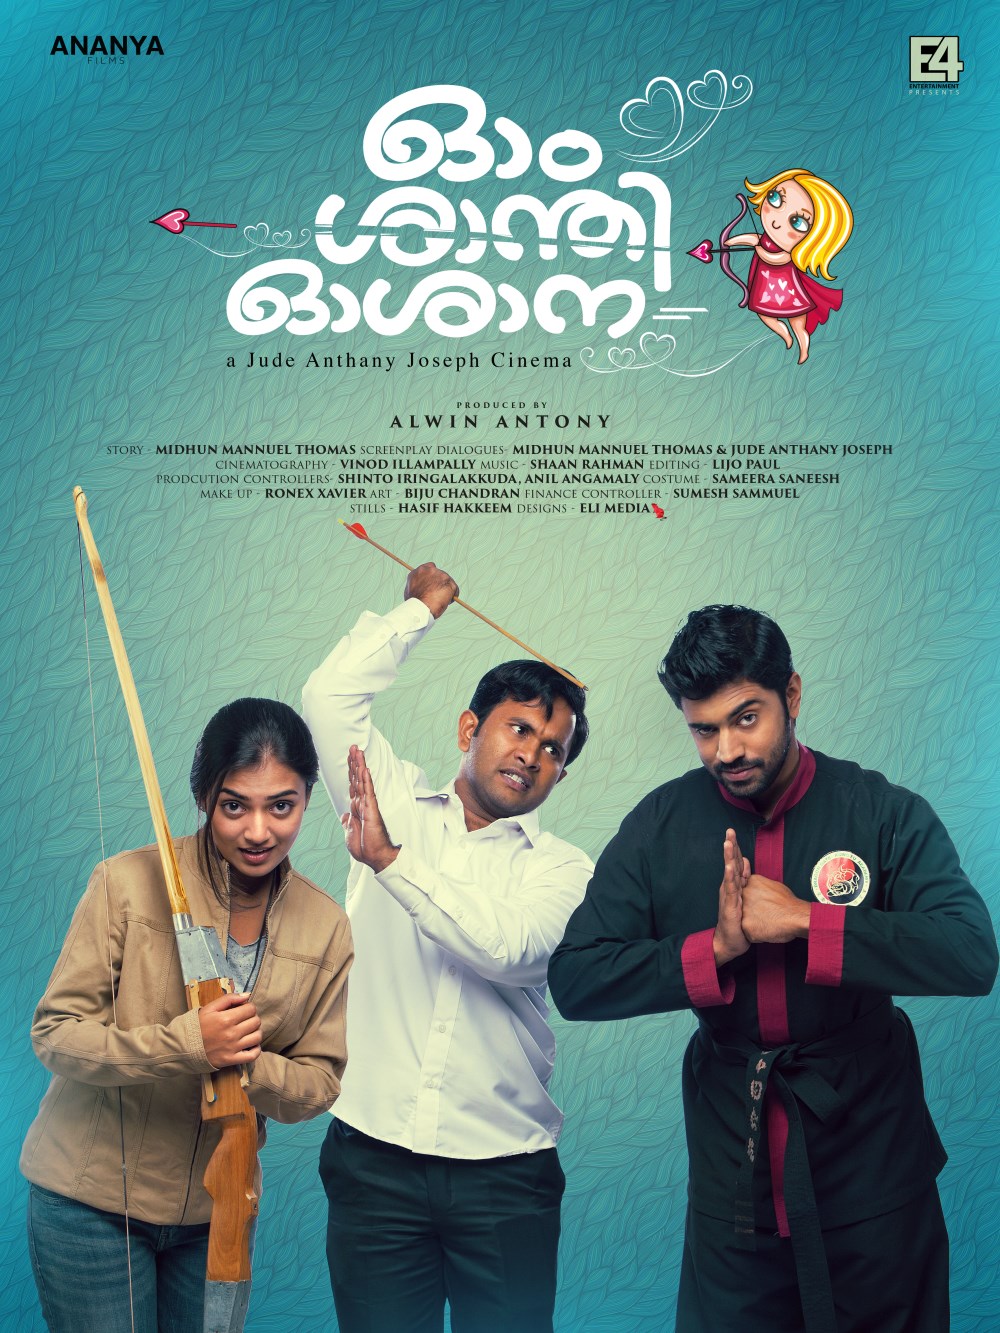 Ohm Shanthi Oshaana Movie Posters & Wallpapers | Moviegalleri.net